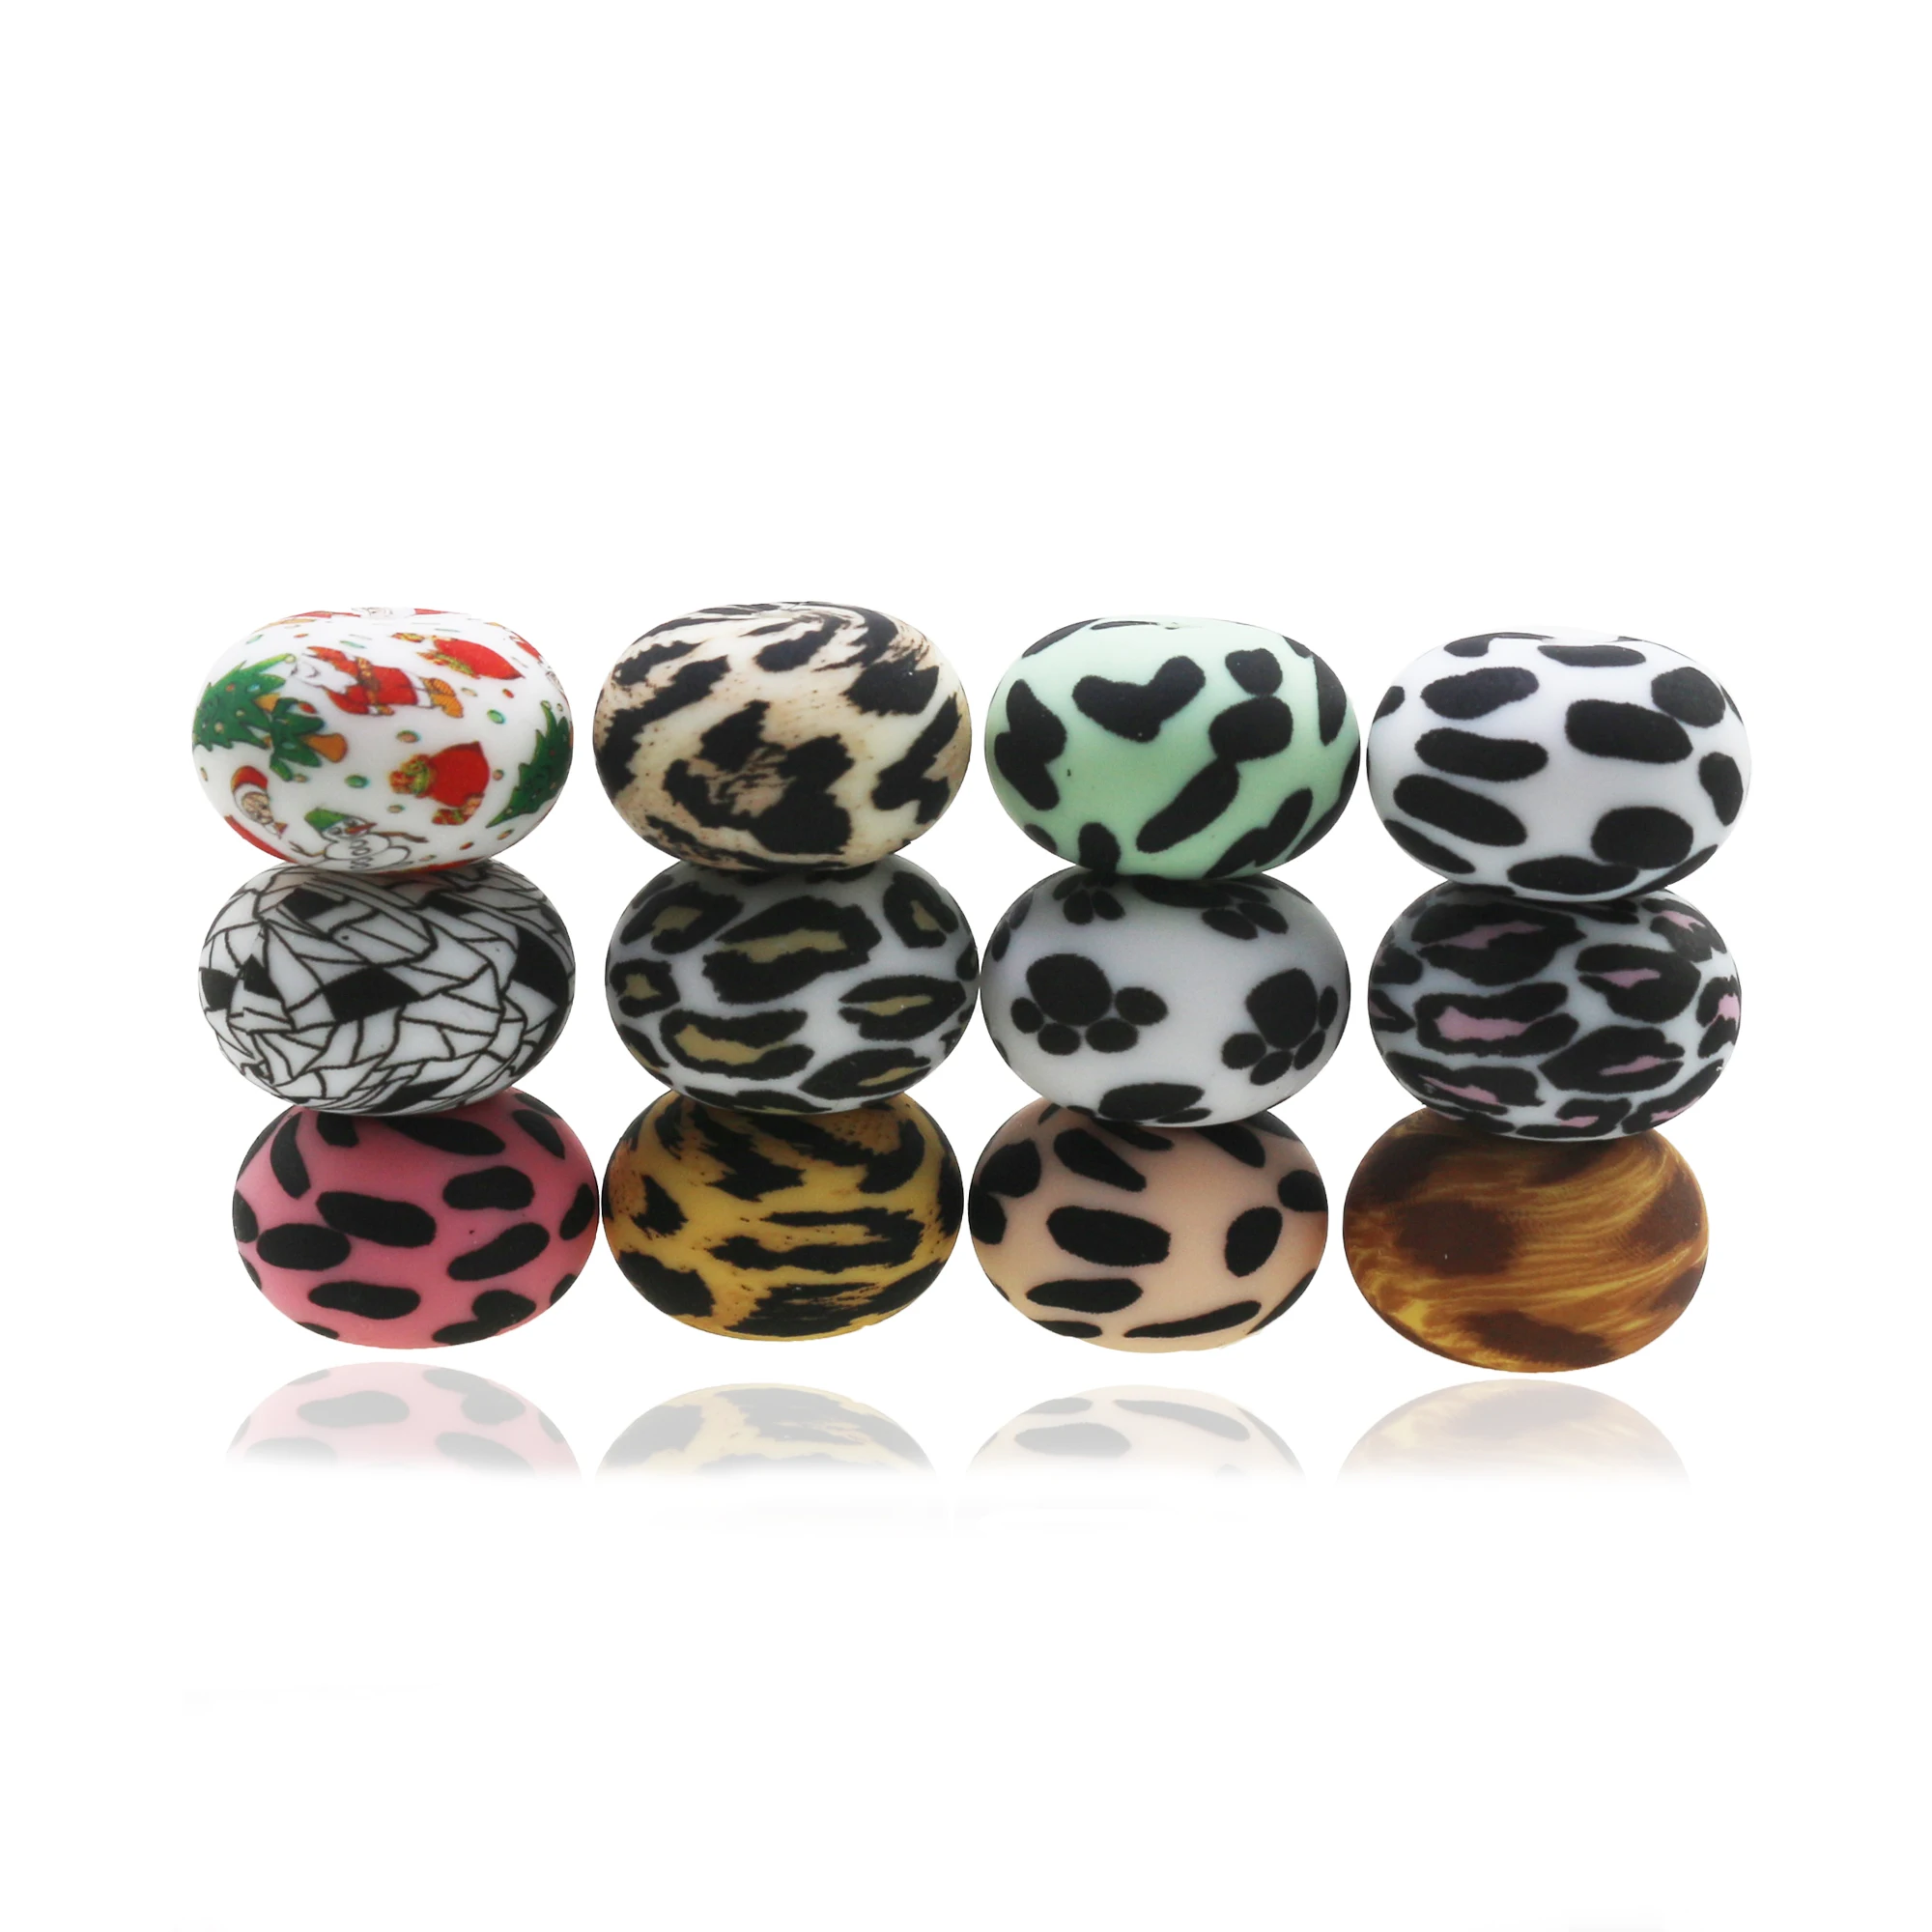 

New Desgin Colorful Leopard Print Abacus Beads 20mm BPA FREE Silicone Baby Teething Beads For Keychain Cow Print Silicone Beads, 33 colors, customed